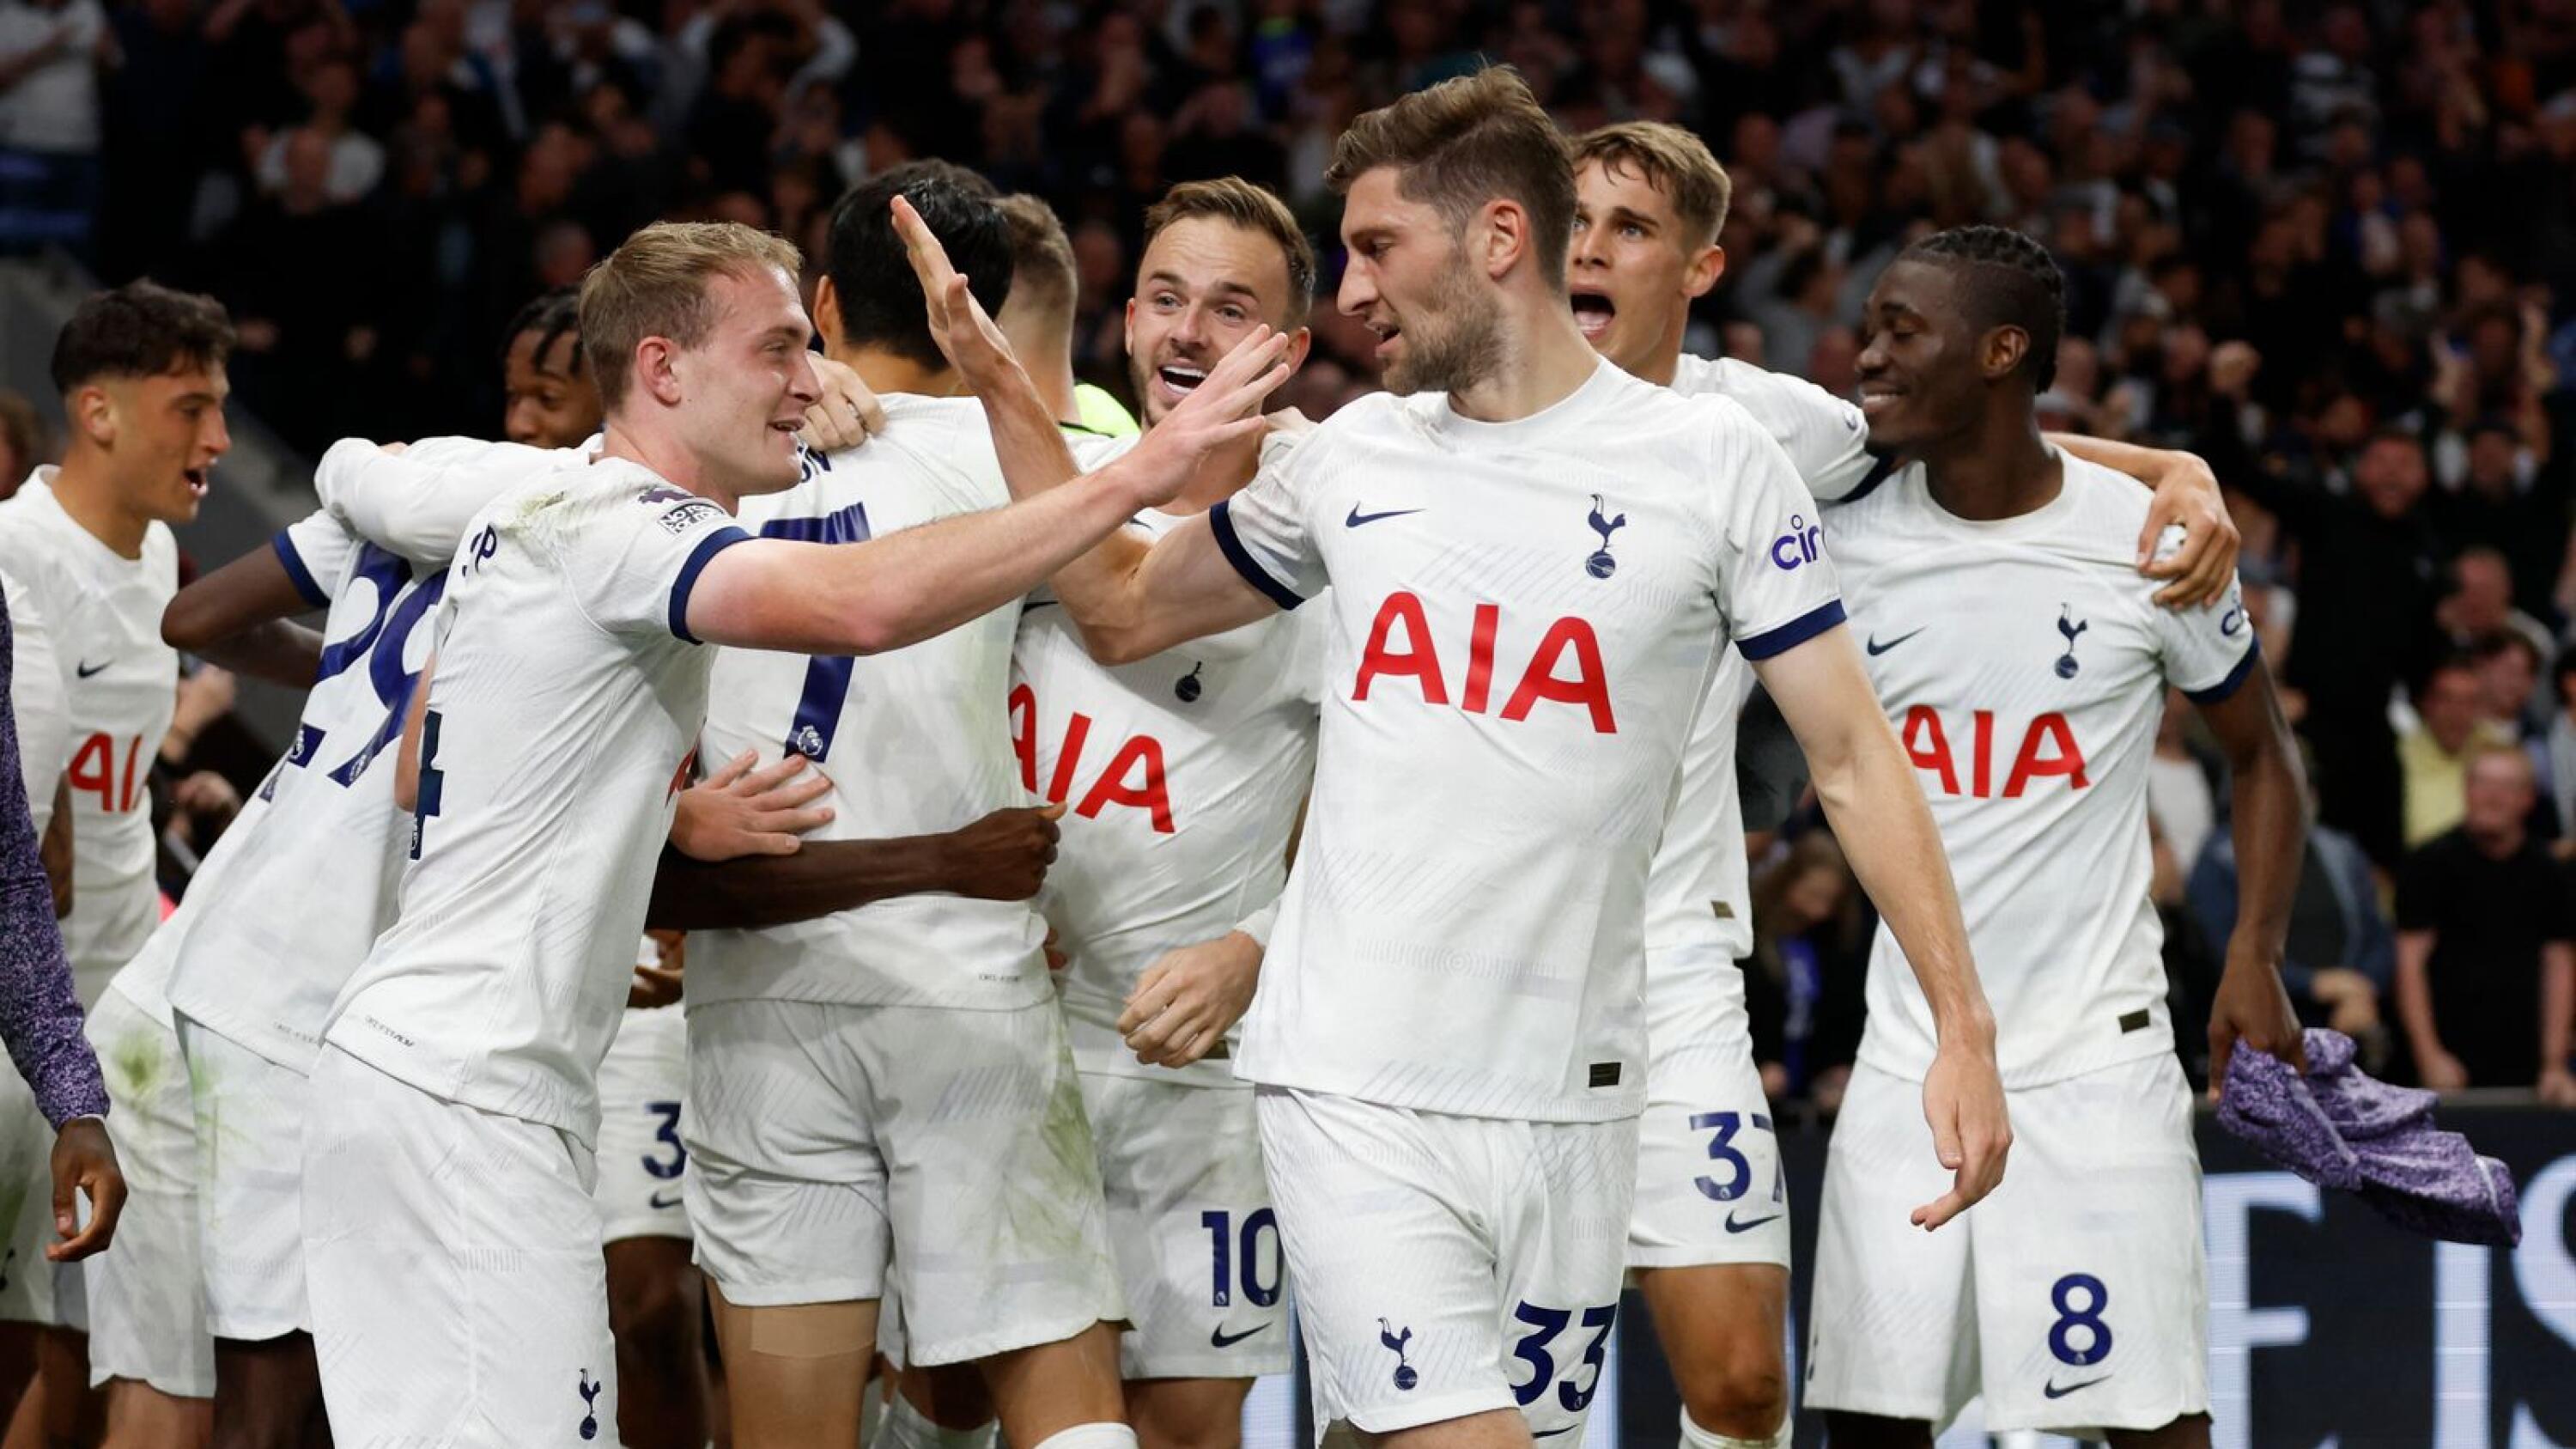 Tottenham Hotspur players celebrate after Liverpool’s Joel Matip scored an injury time own goal during their Premier League